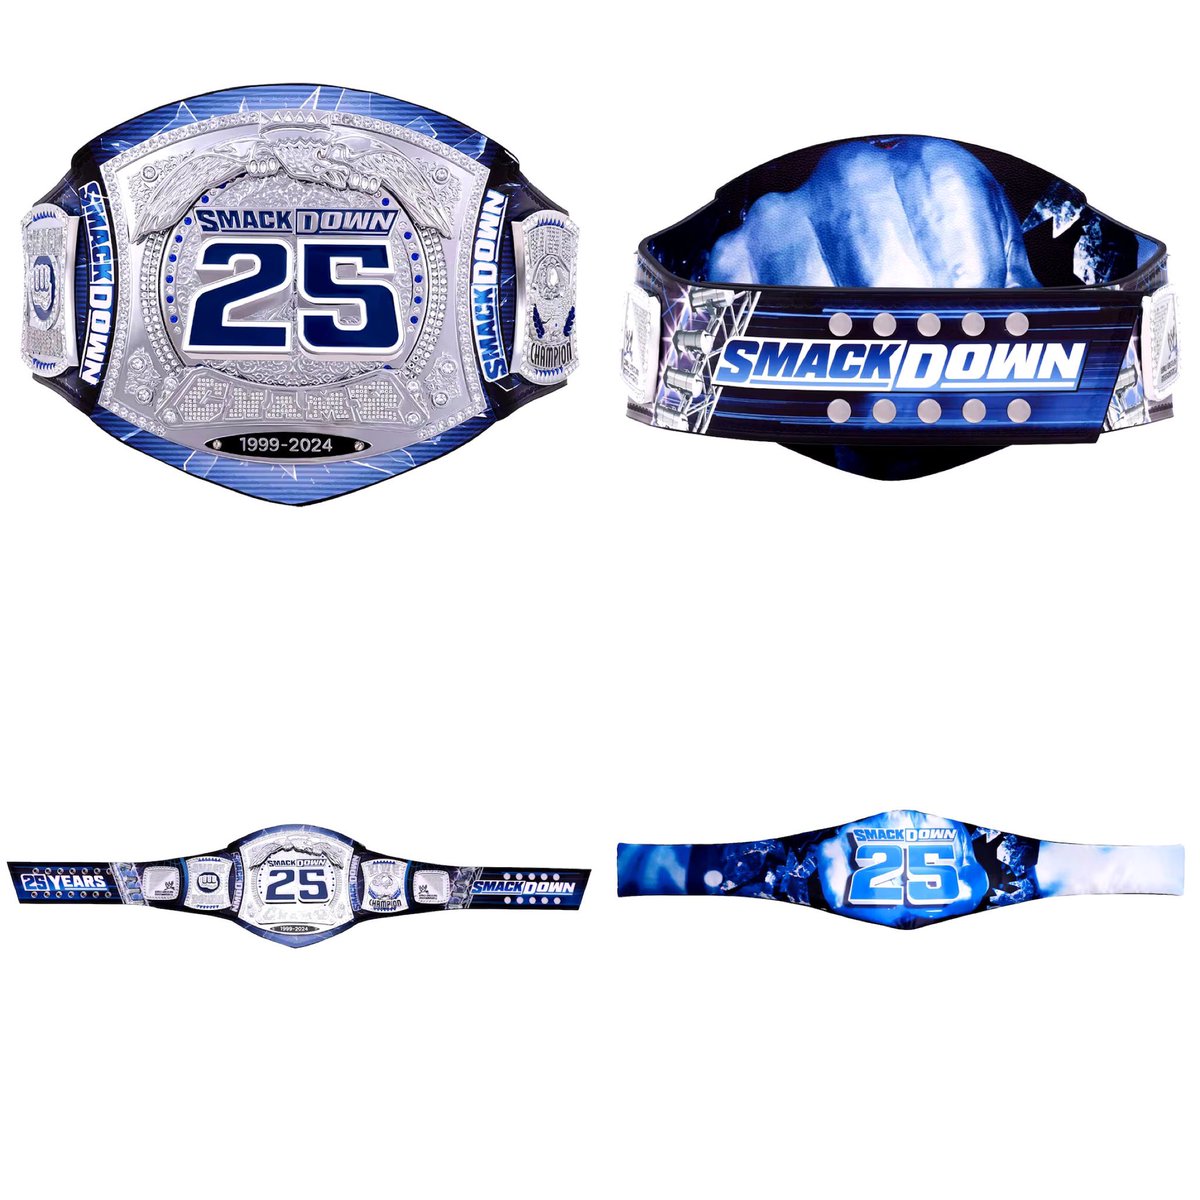 Check out this 25th anniversary Smackdown WWE championship limited to only 175 available now on @wweshop 

wwe-shop.sjv.io/xkdBEd

#figheel #actionfigures #toycommunity #toycollector #wrestlingfigures #wwe #aew #njpw #tna